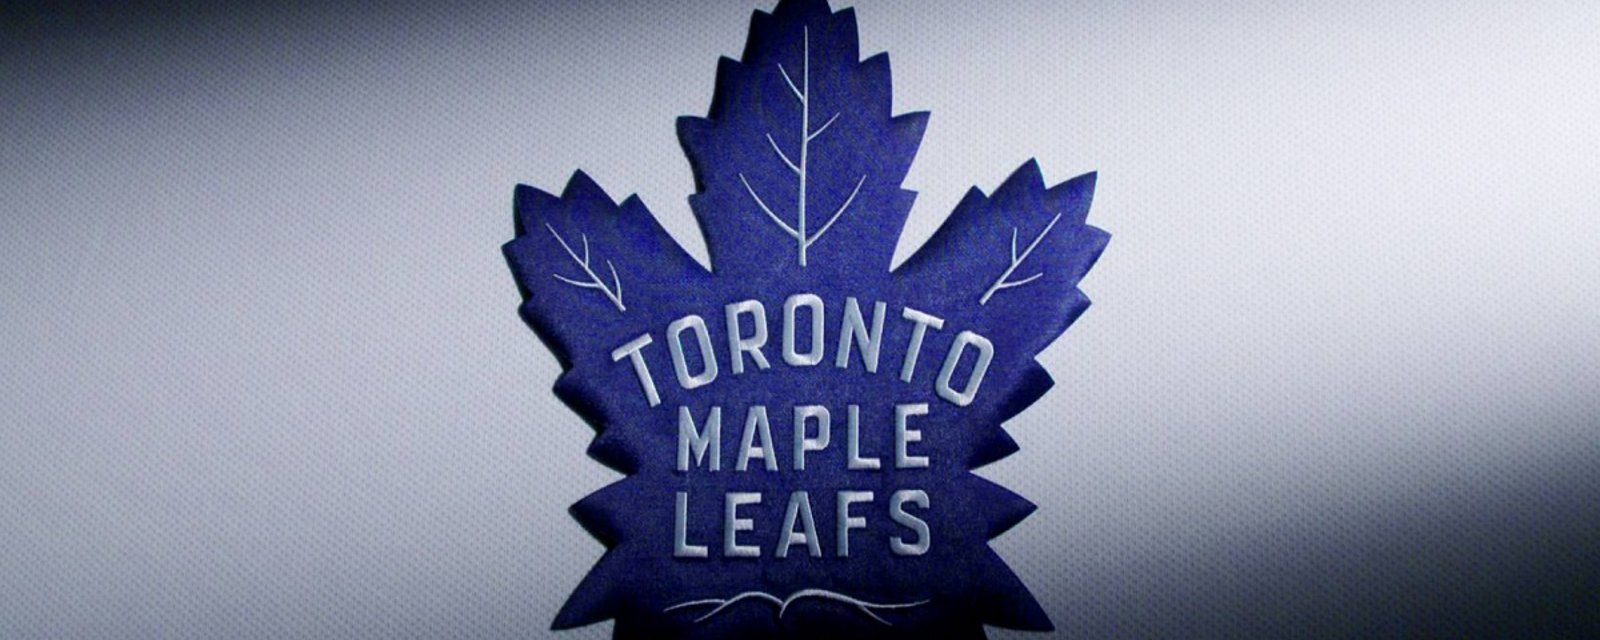 Maple Leafs forward placed on long term injured reserve.